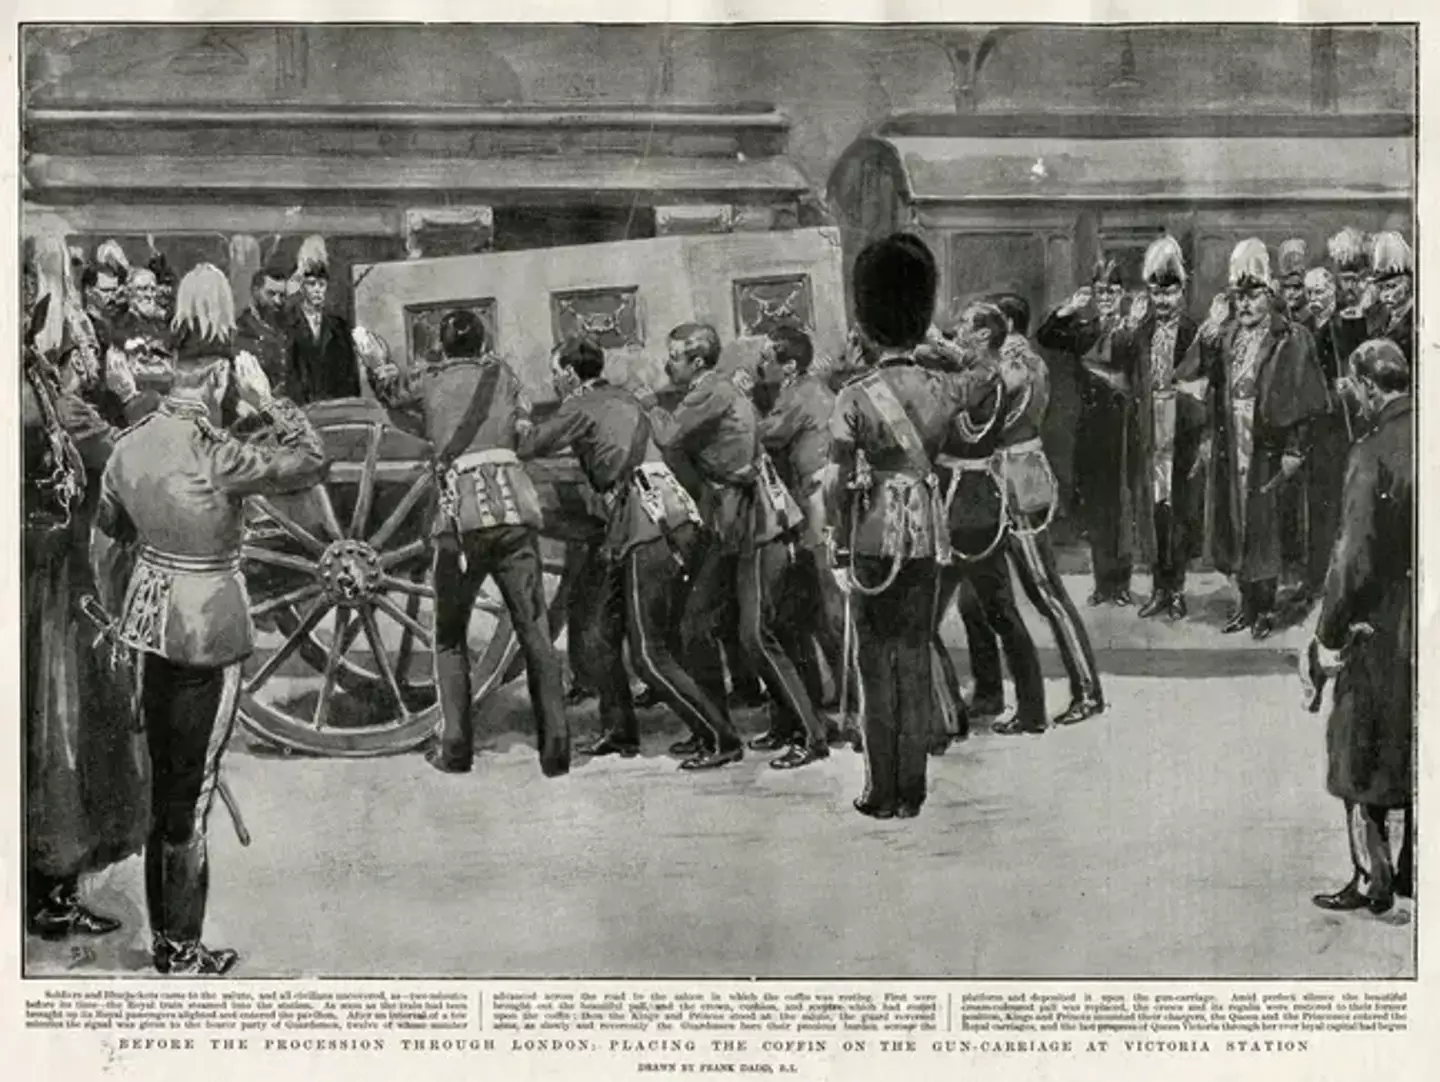 Soldiers loaded Queen Victoria's coffin onto the carriage.